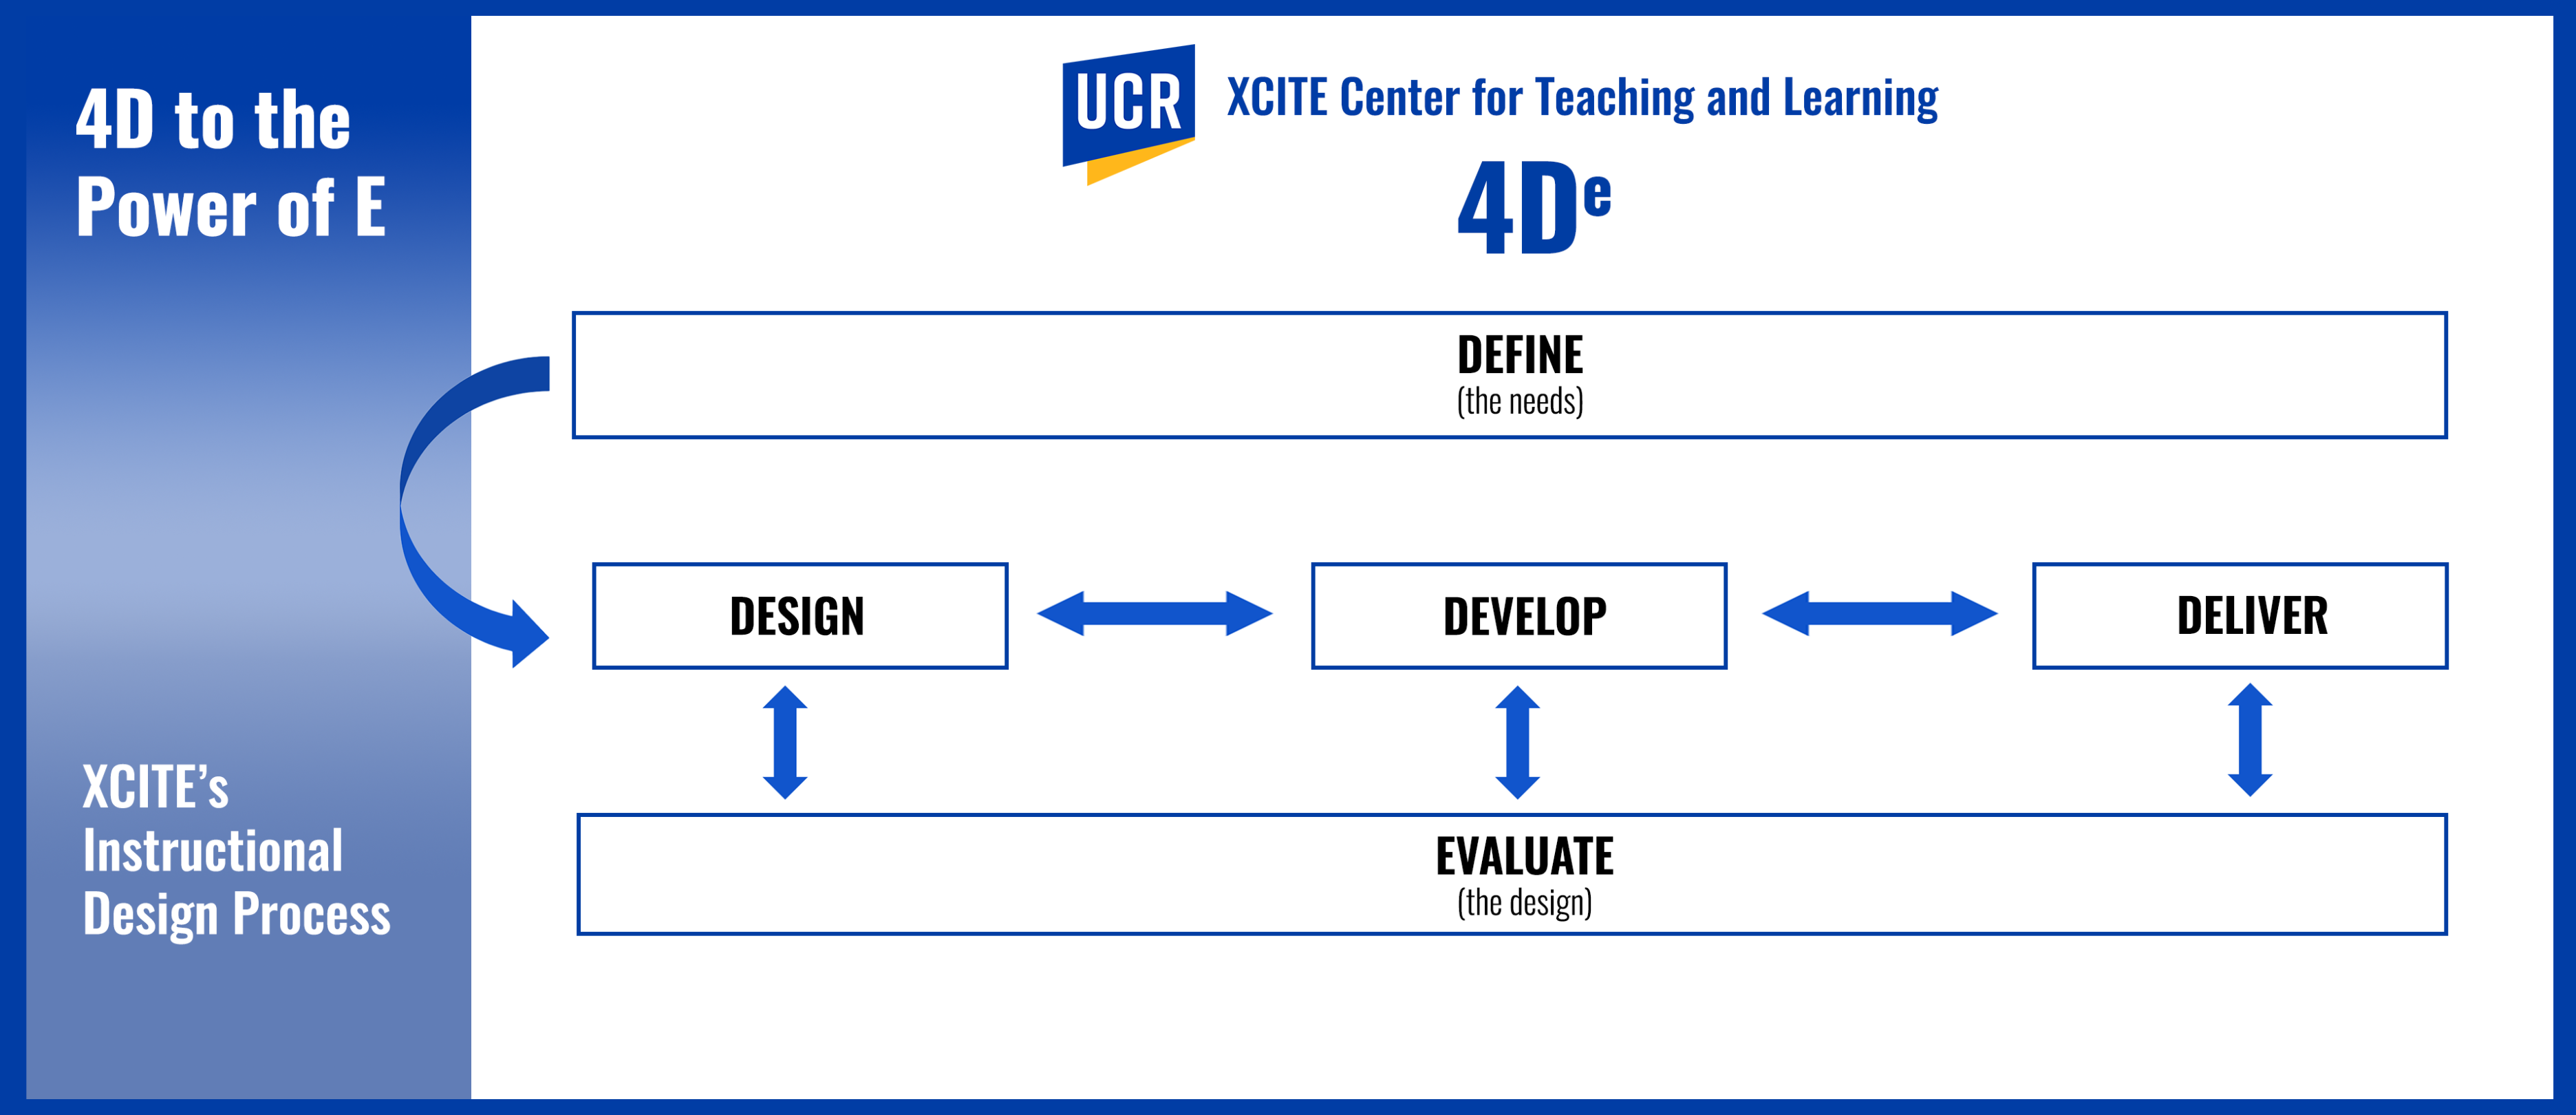 4DE image  1. Define 2. Design, Develop and Deliver, and 3. Evaluate the design. This is XCITEs Instructional Design Process